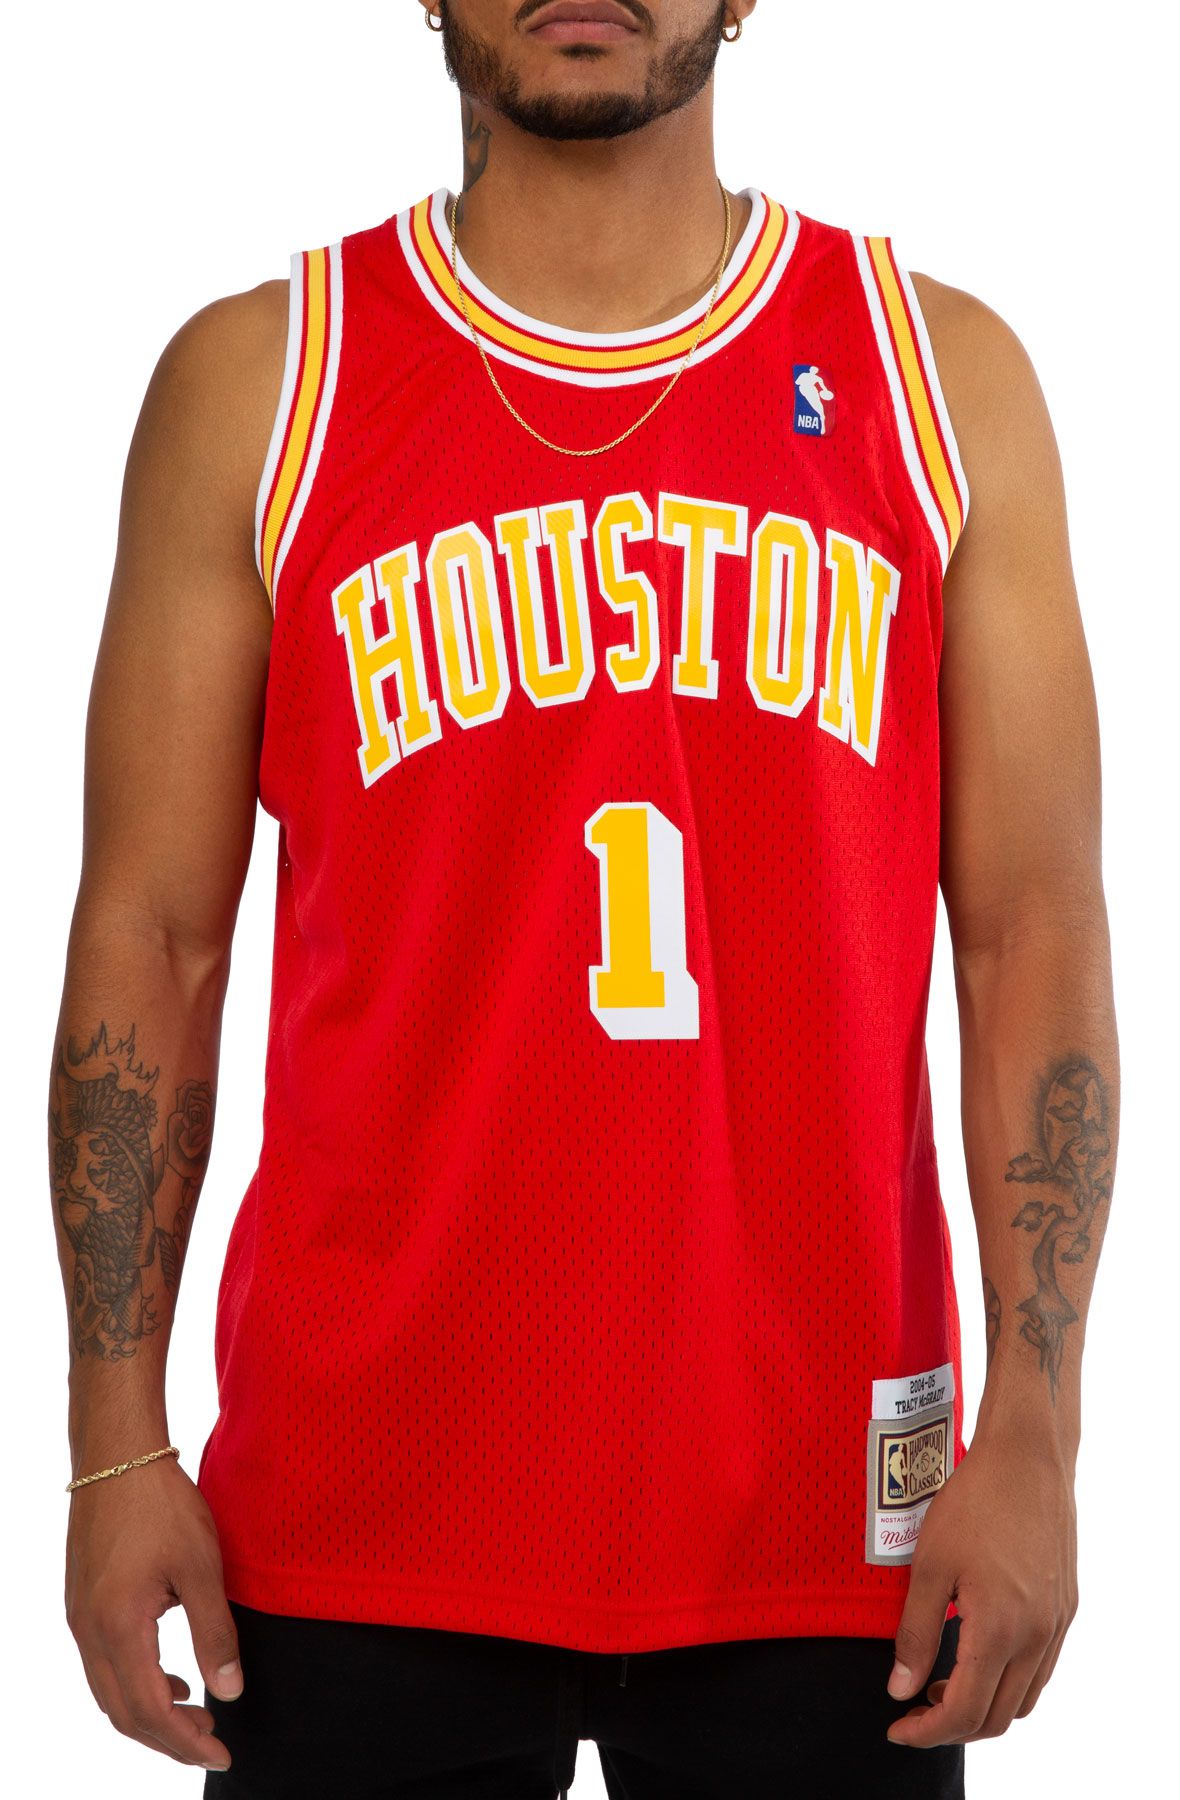 Mitchell & Ness Tracy McGrady 2004 All Star East Authentic Jersey